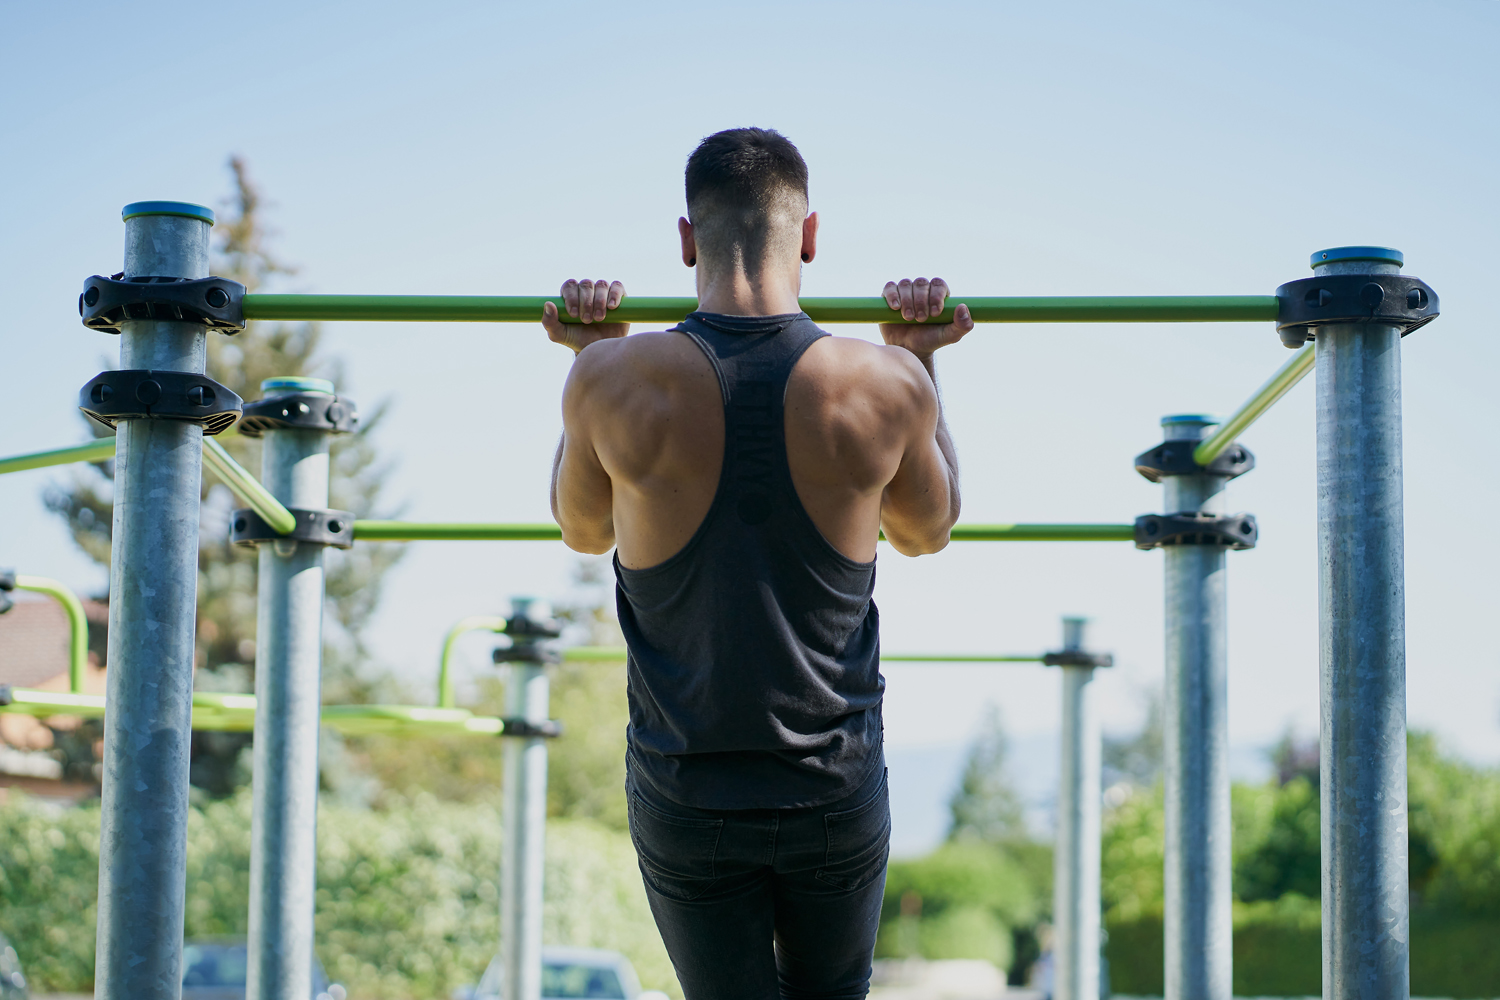 What Is Calisthenics? What to Know About the Workout Trend